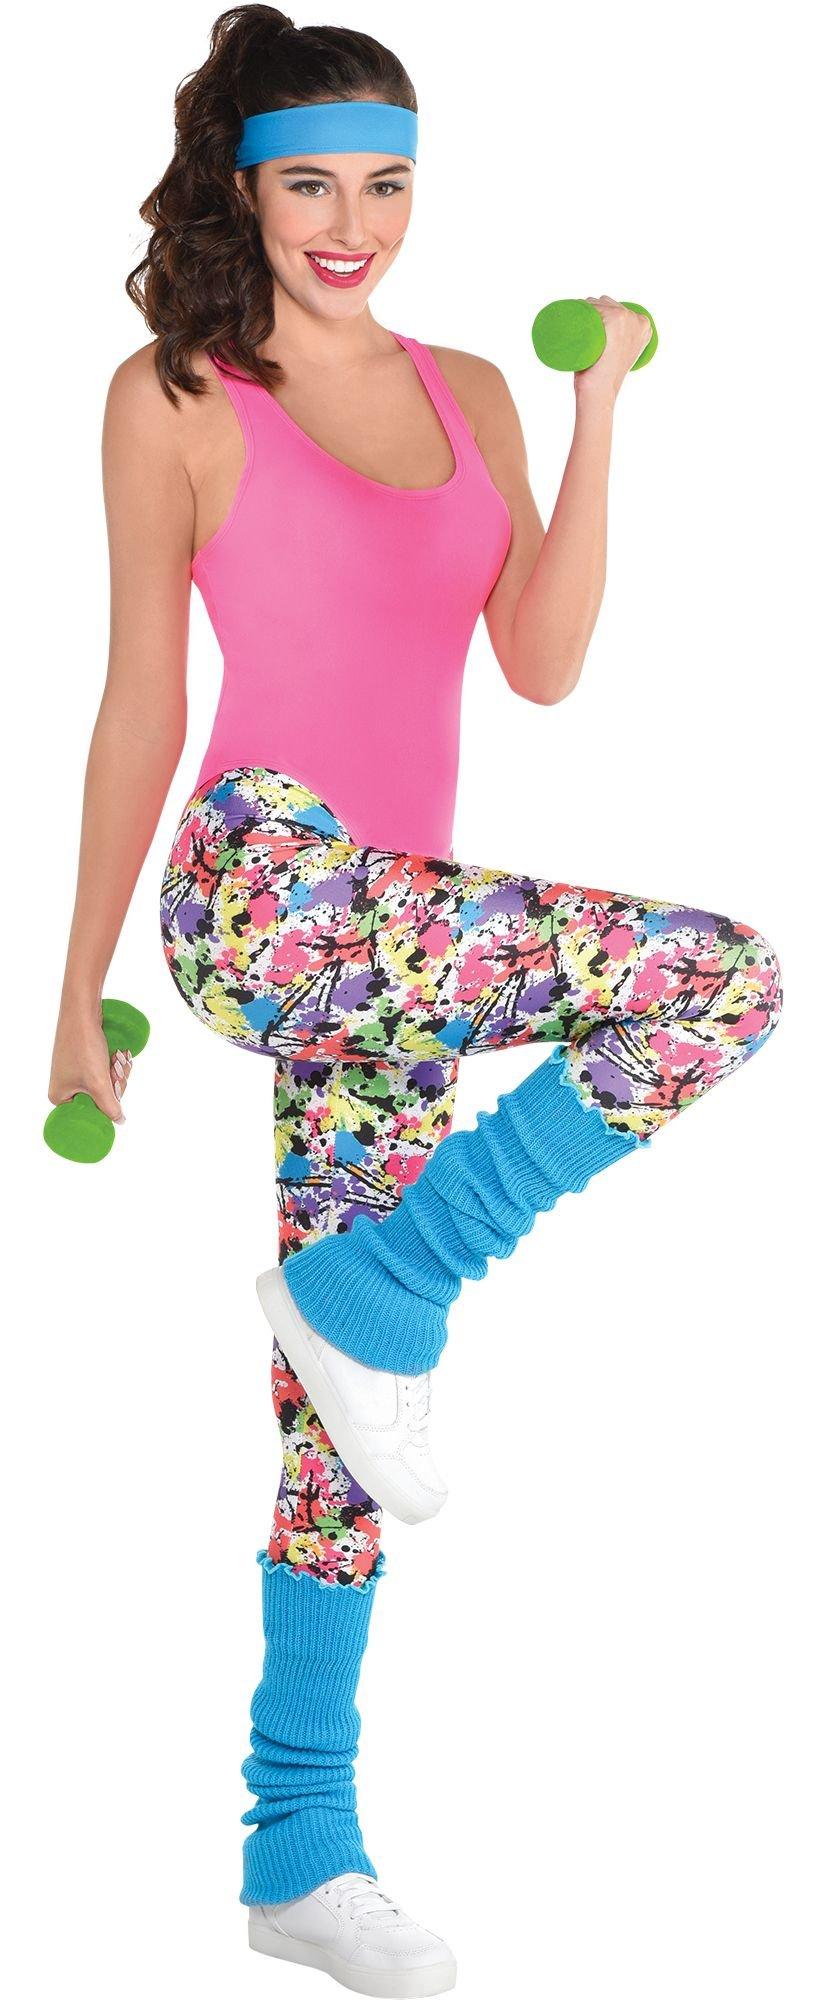 80s Exercise Costume Accessory | Party City